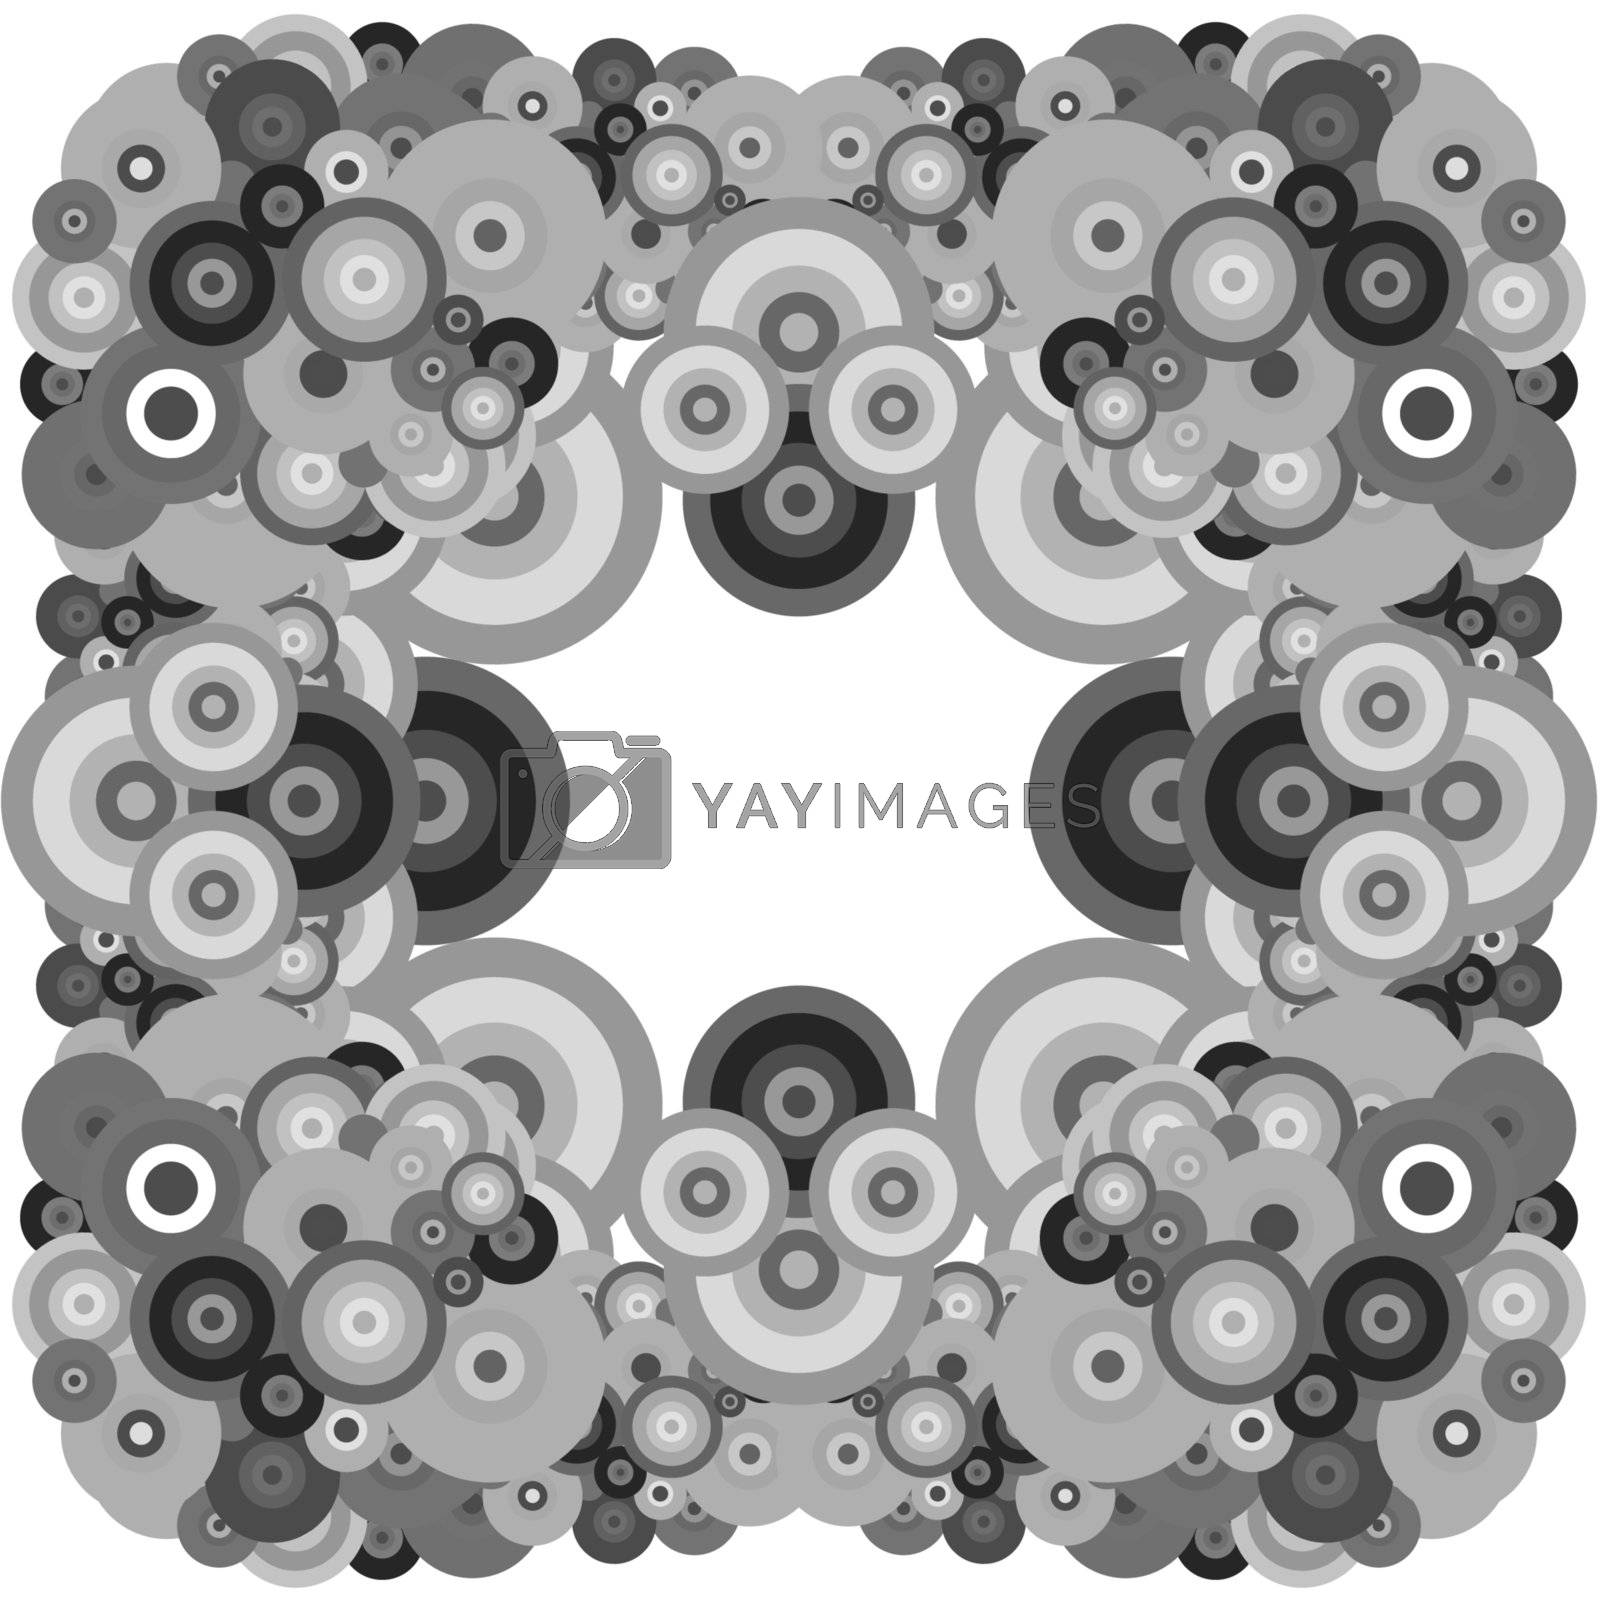 Royalty free image of Abstract monochrome vector illustration by Nobilior